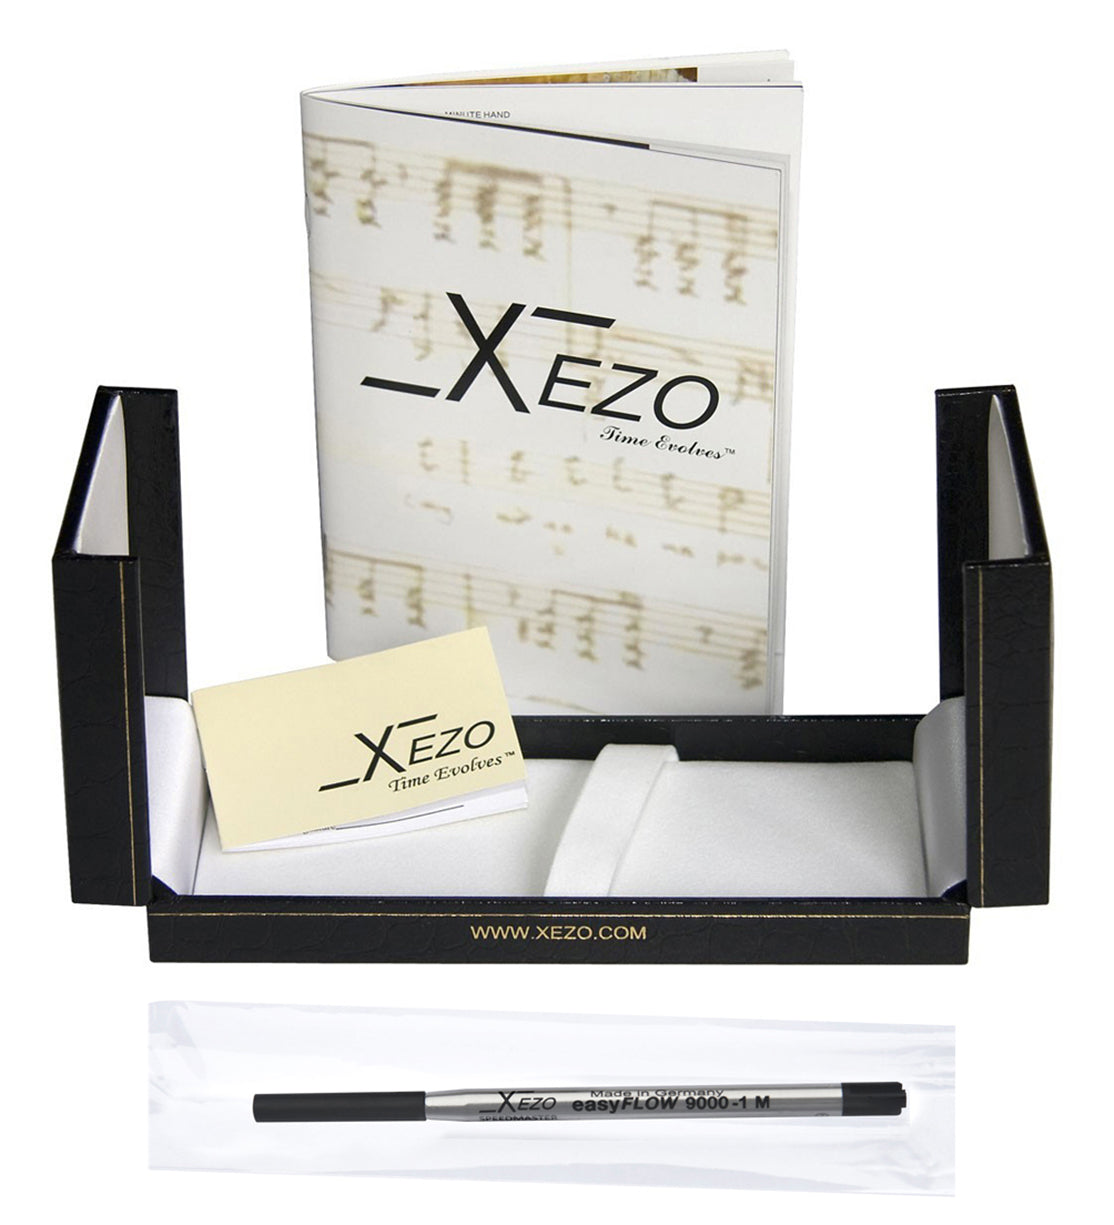 Xezo - Black gift box, certificate, manual, and ink cartridge of the Incognito Zinc B ballpoint pen